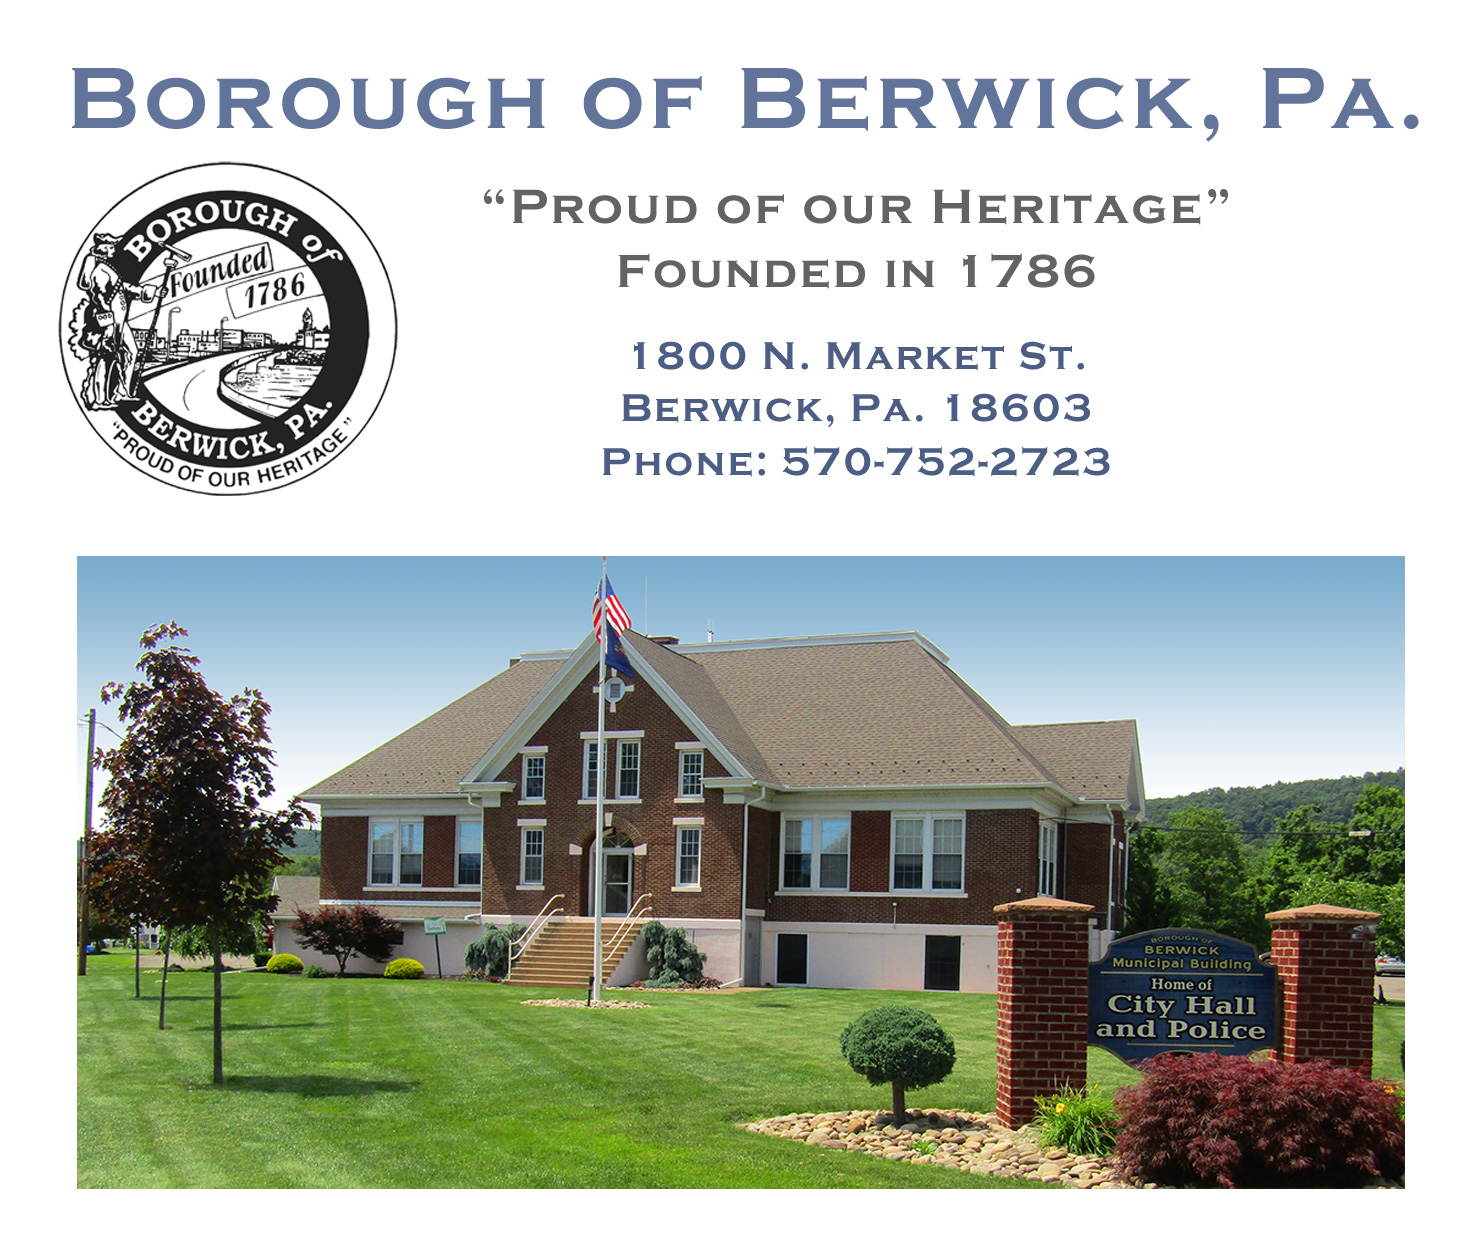 About Berwick  Schools, Demographics, Things to Do 